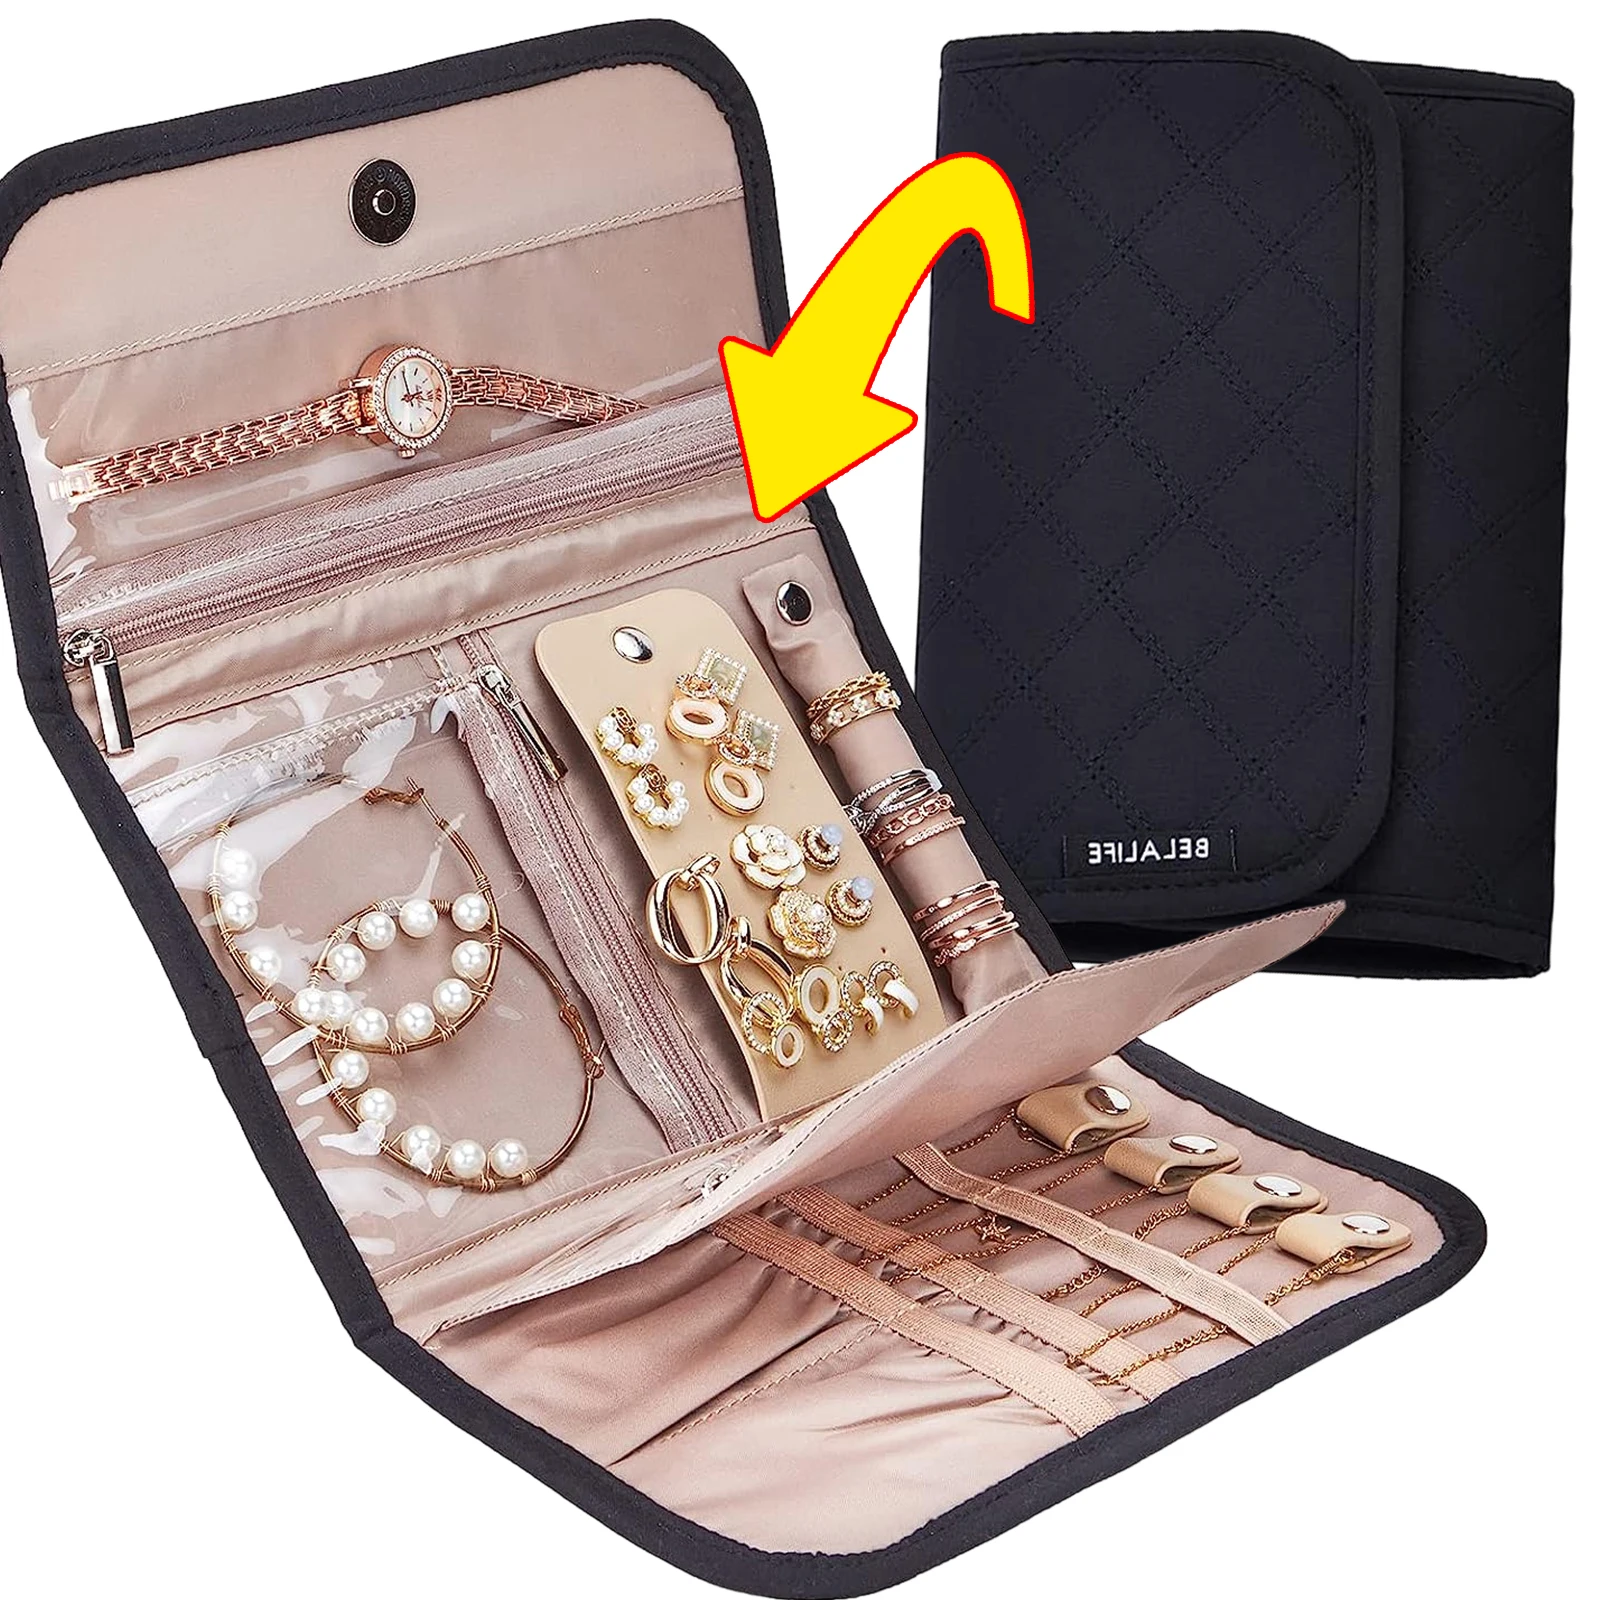 Roll Foldable Jewelry Case Travel Jewelry Organizer Portable for Journey Earrings Rings Diamond Necklaces Brooches Storage Bag luxury square velvet jewelry a pair rings earring display case box storage organizer holder gift packag portable travel wedding